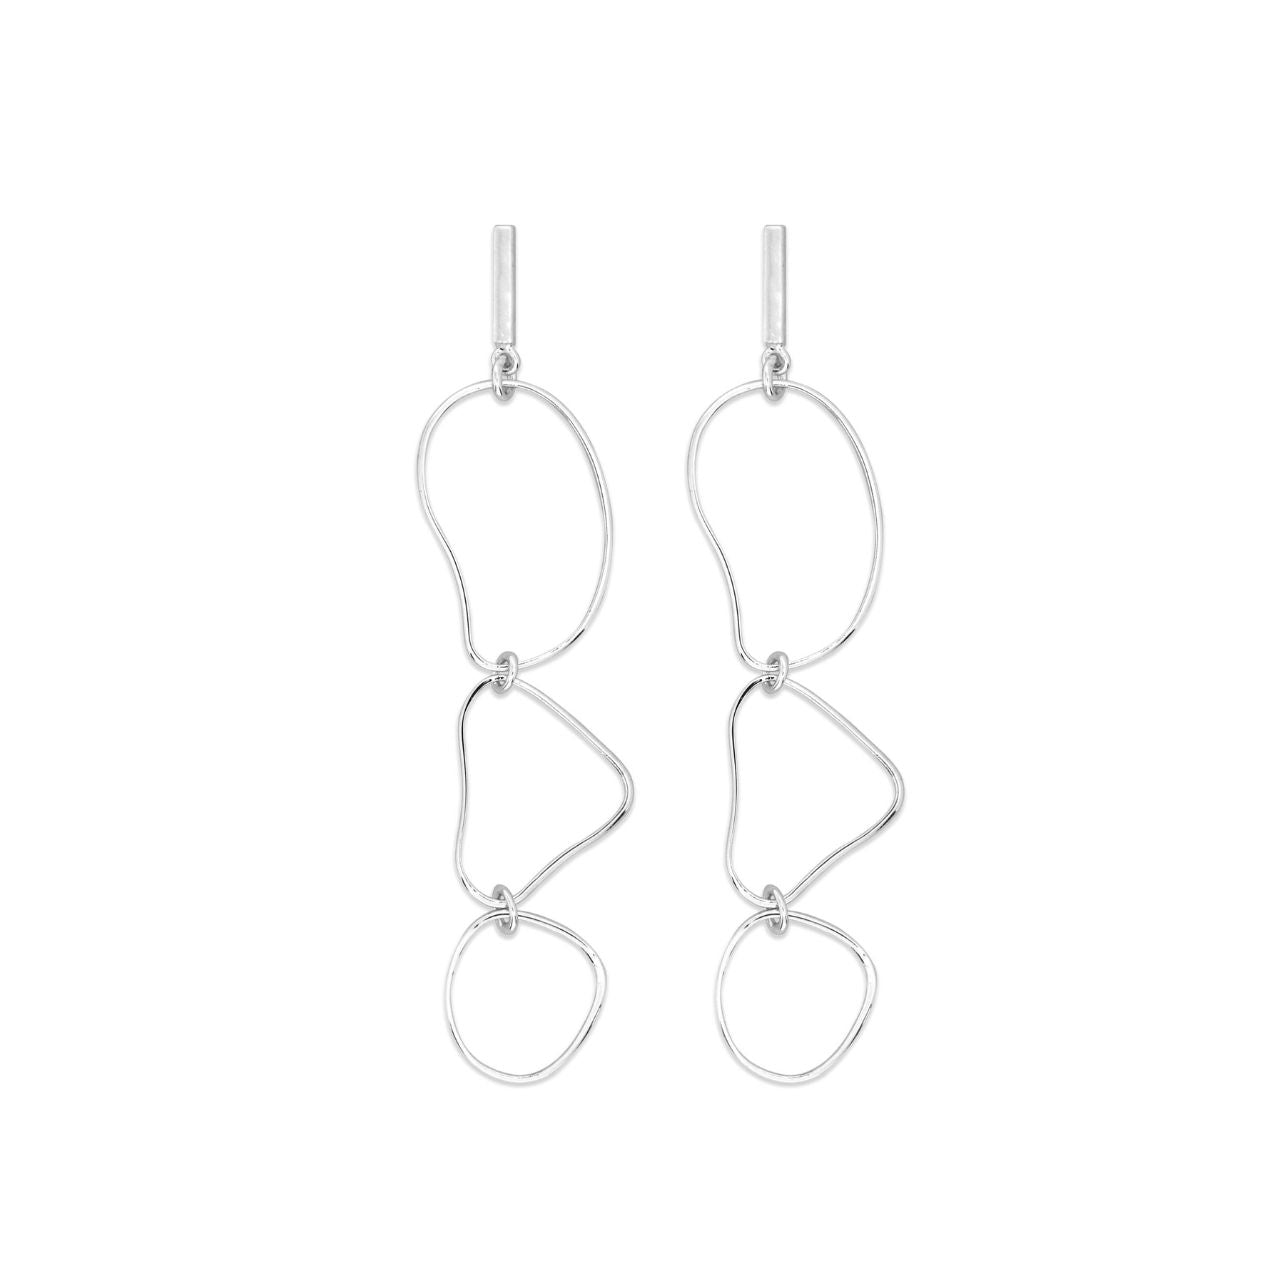 The Tipperary Crystal Skandi jewelry collection is inspired by our love for the simple, clean lines of Scandinavian design. This is reflected in the culture and design throughout this part of the world with structured shapes and simple lines